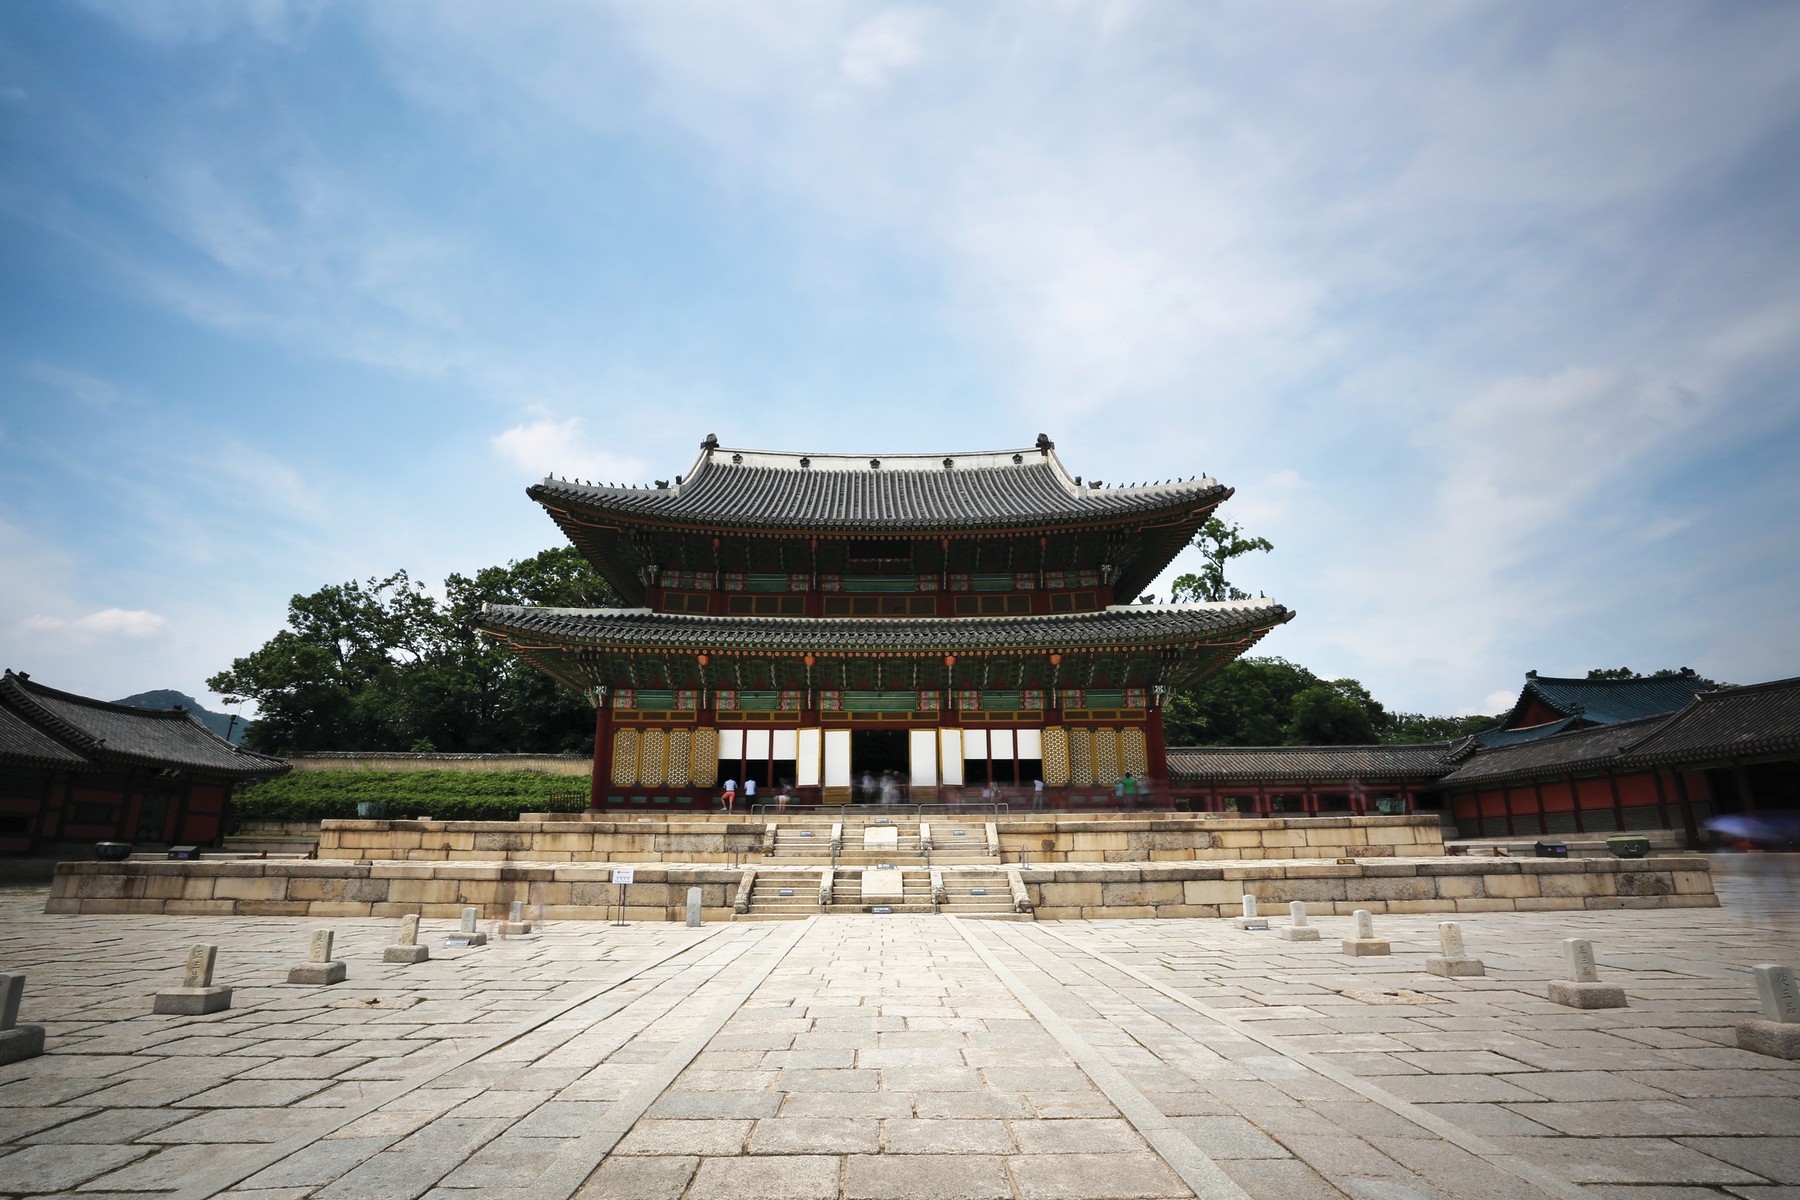 <B>Injeongjeon Hall in Changdeokgung Palace.</b> The Palace Hall was used for important state events such as the Coronation of Kings, royal audiences, and formal reception of foreign envoys.